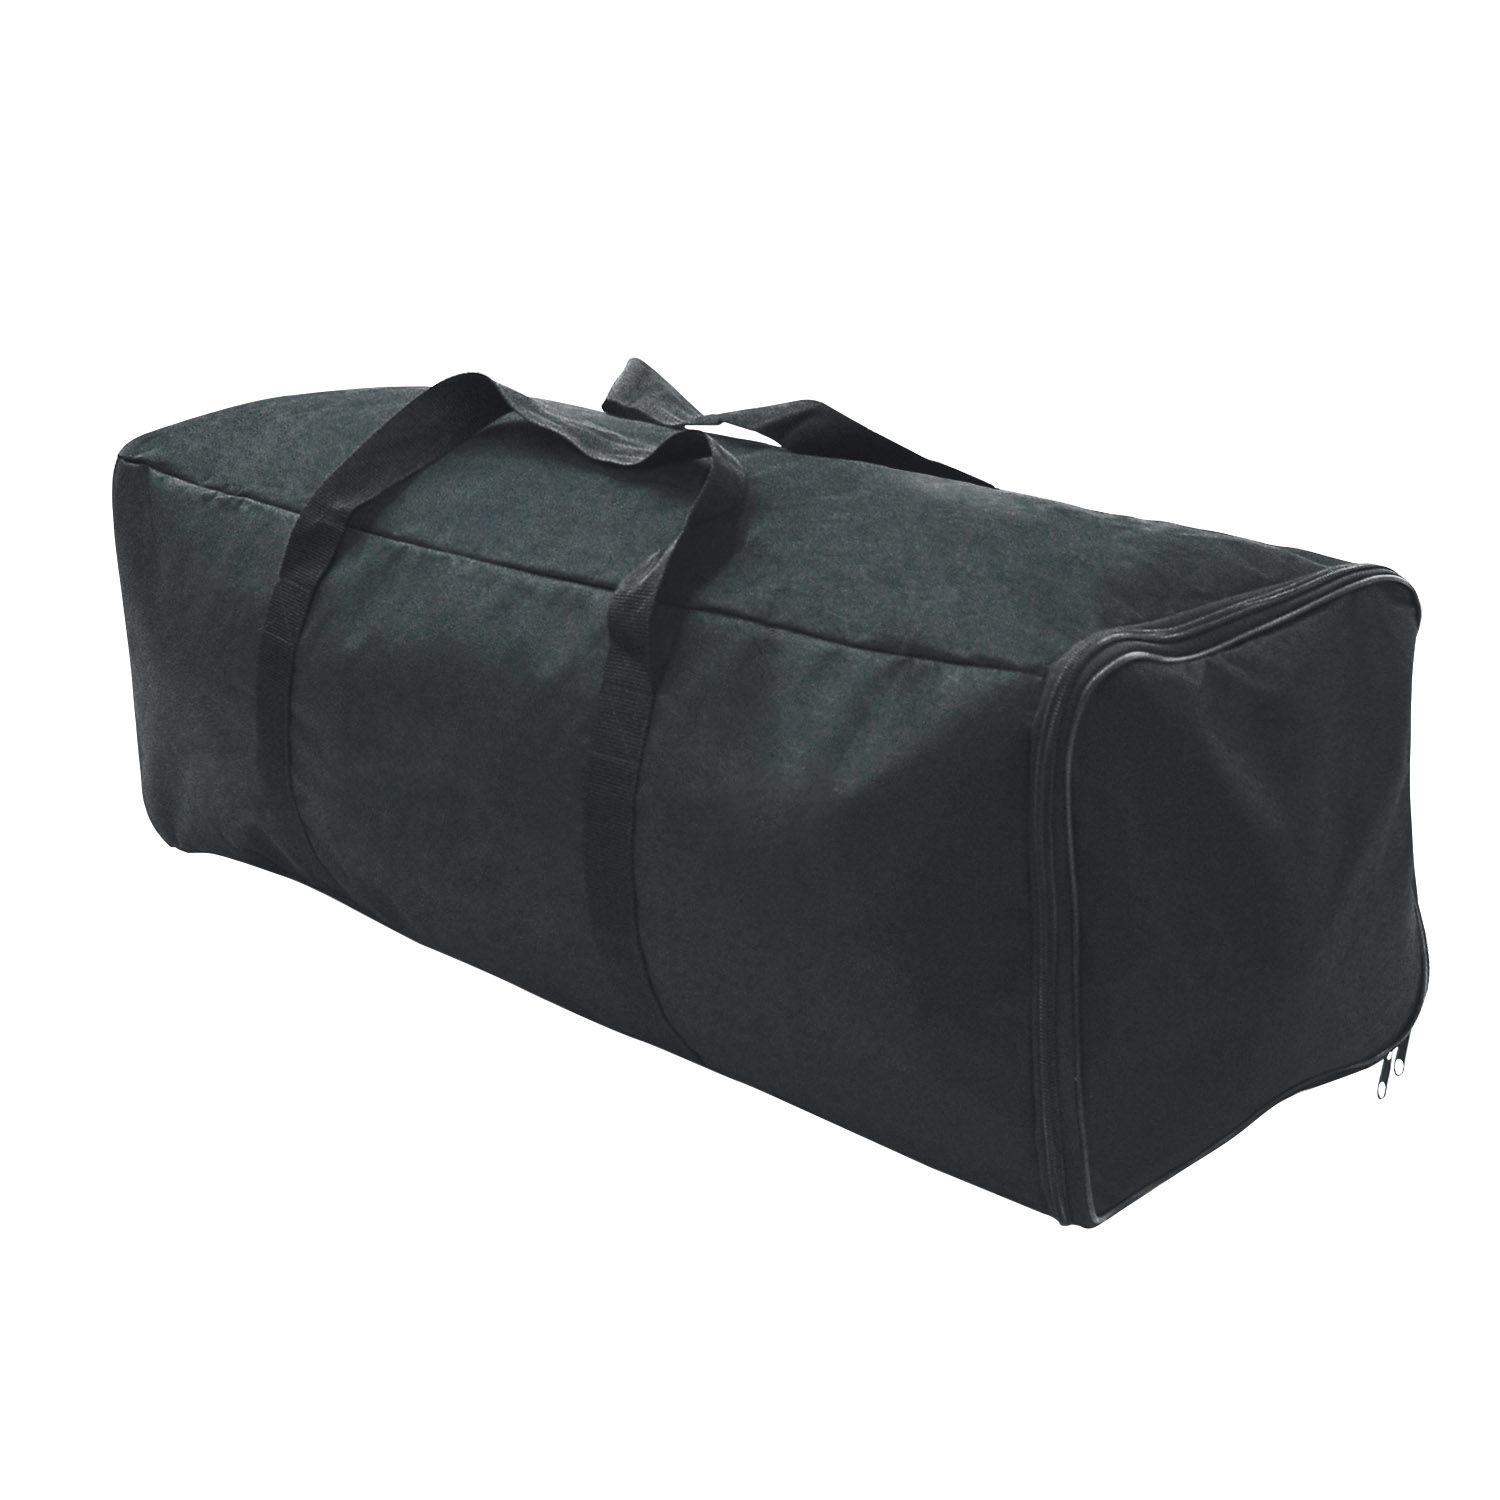 32.5" Soft Carry Case for Fabric Displays